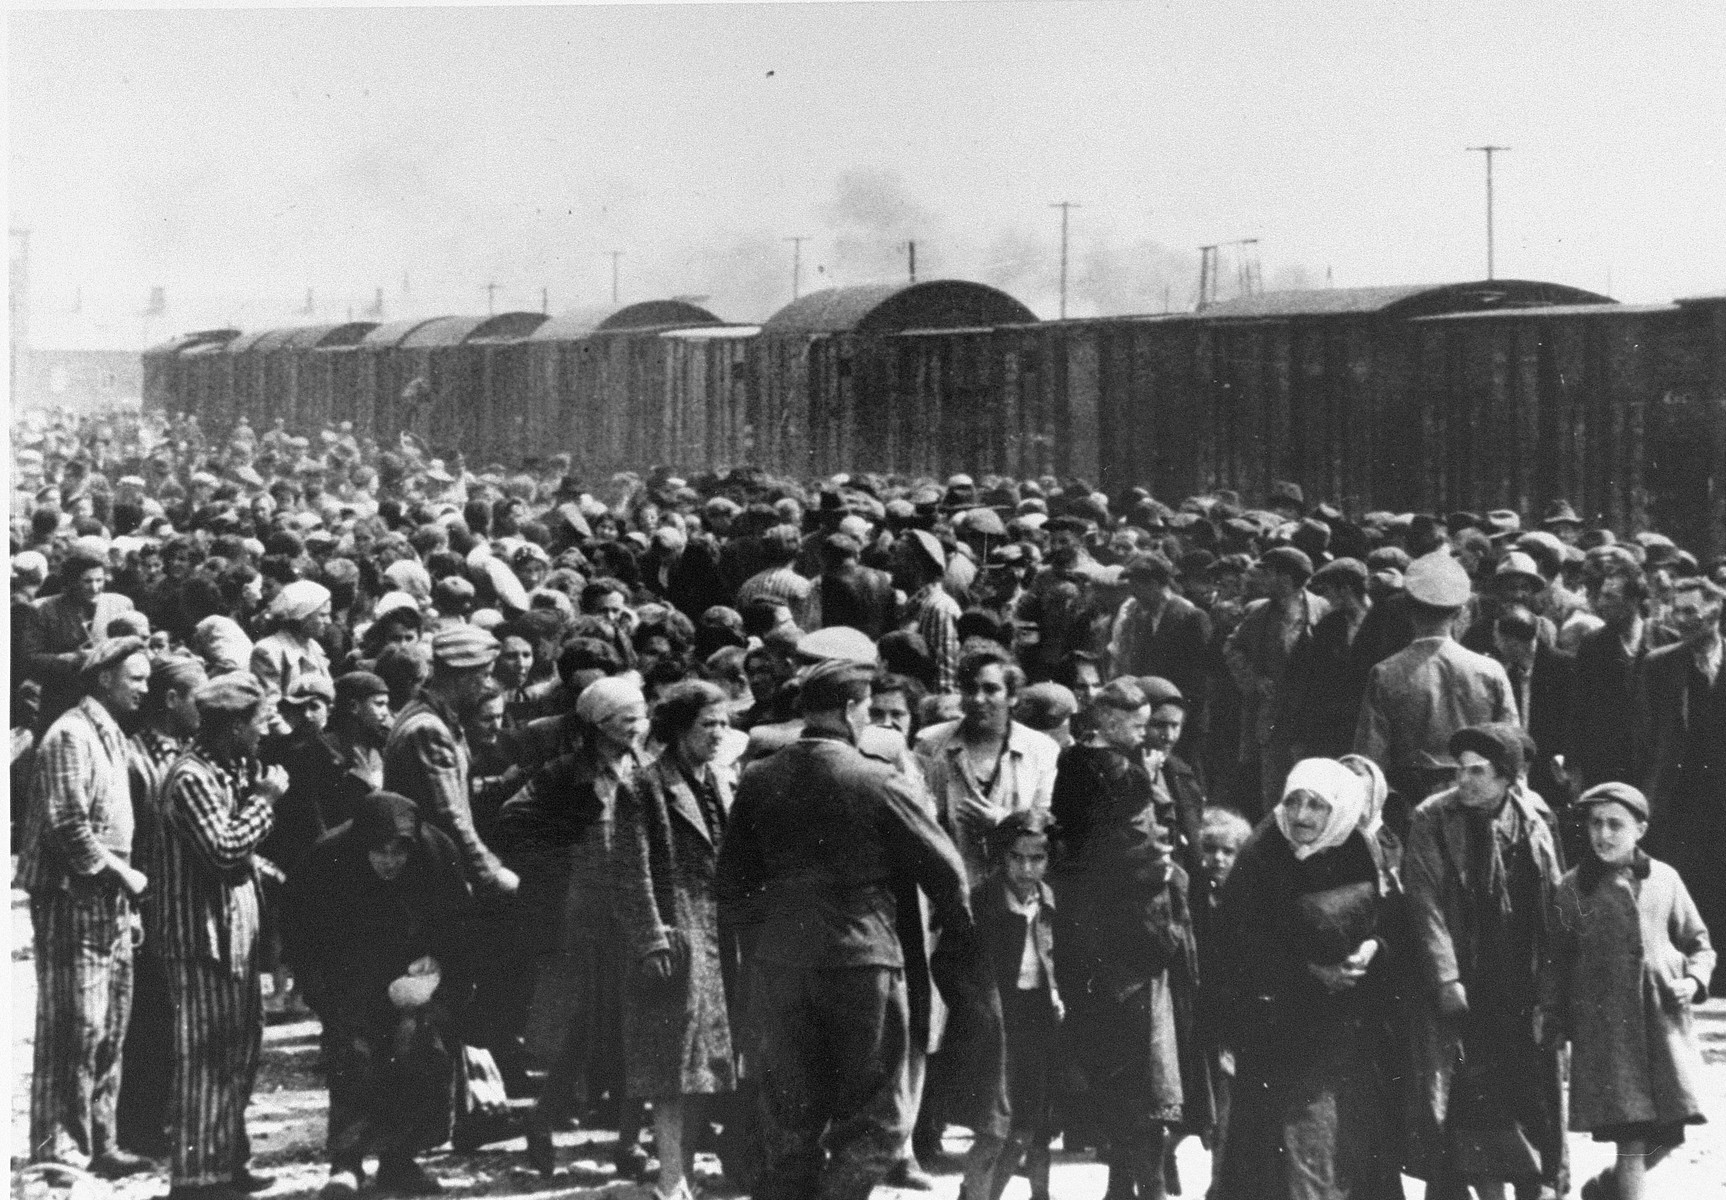 Selection of Jews from Subcarpathian Rus on the ramp at Auschwitz-Birkenau.  

Pictured second from the left, in a striped uniform is Eddy Wynschenk.

See hard copy of worksheet for further identifications.